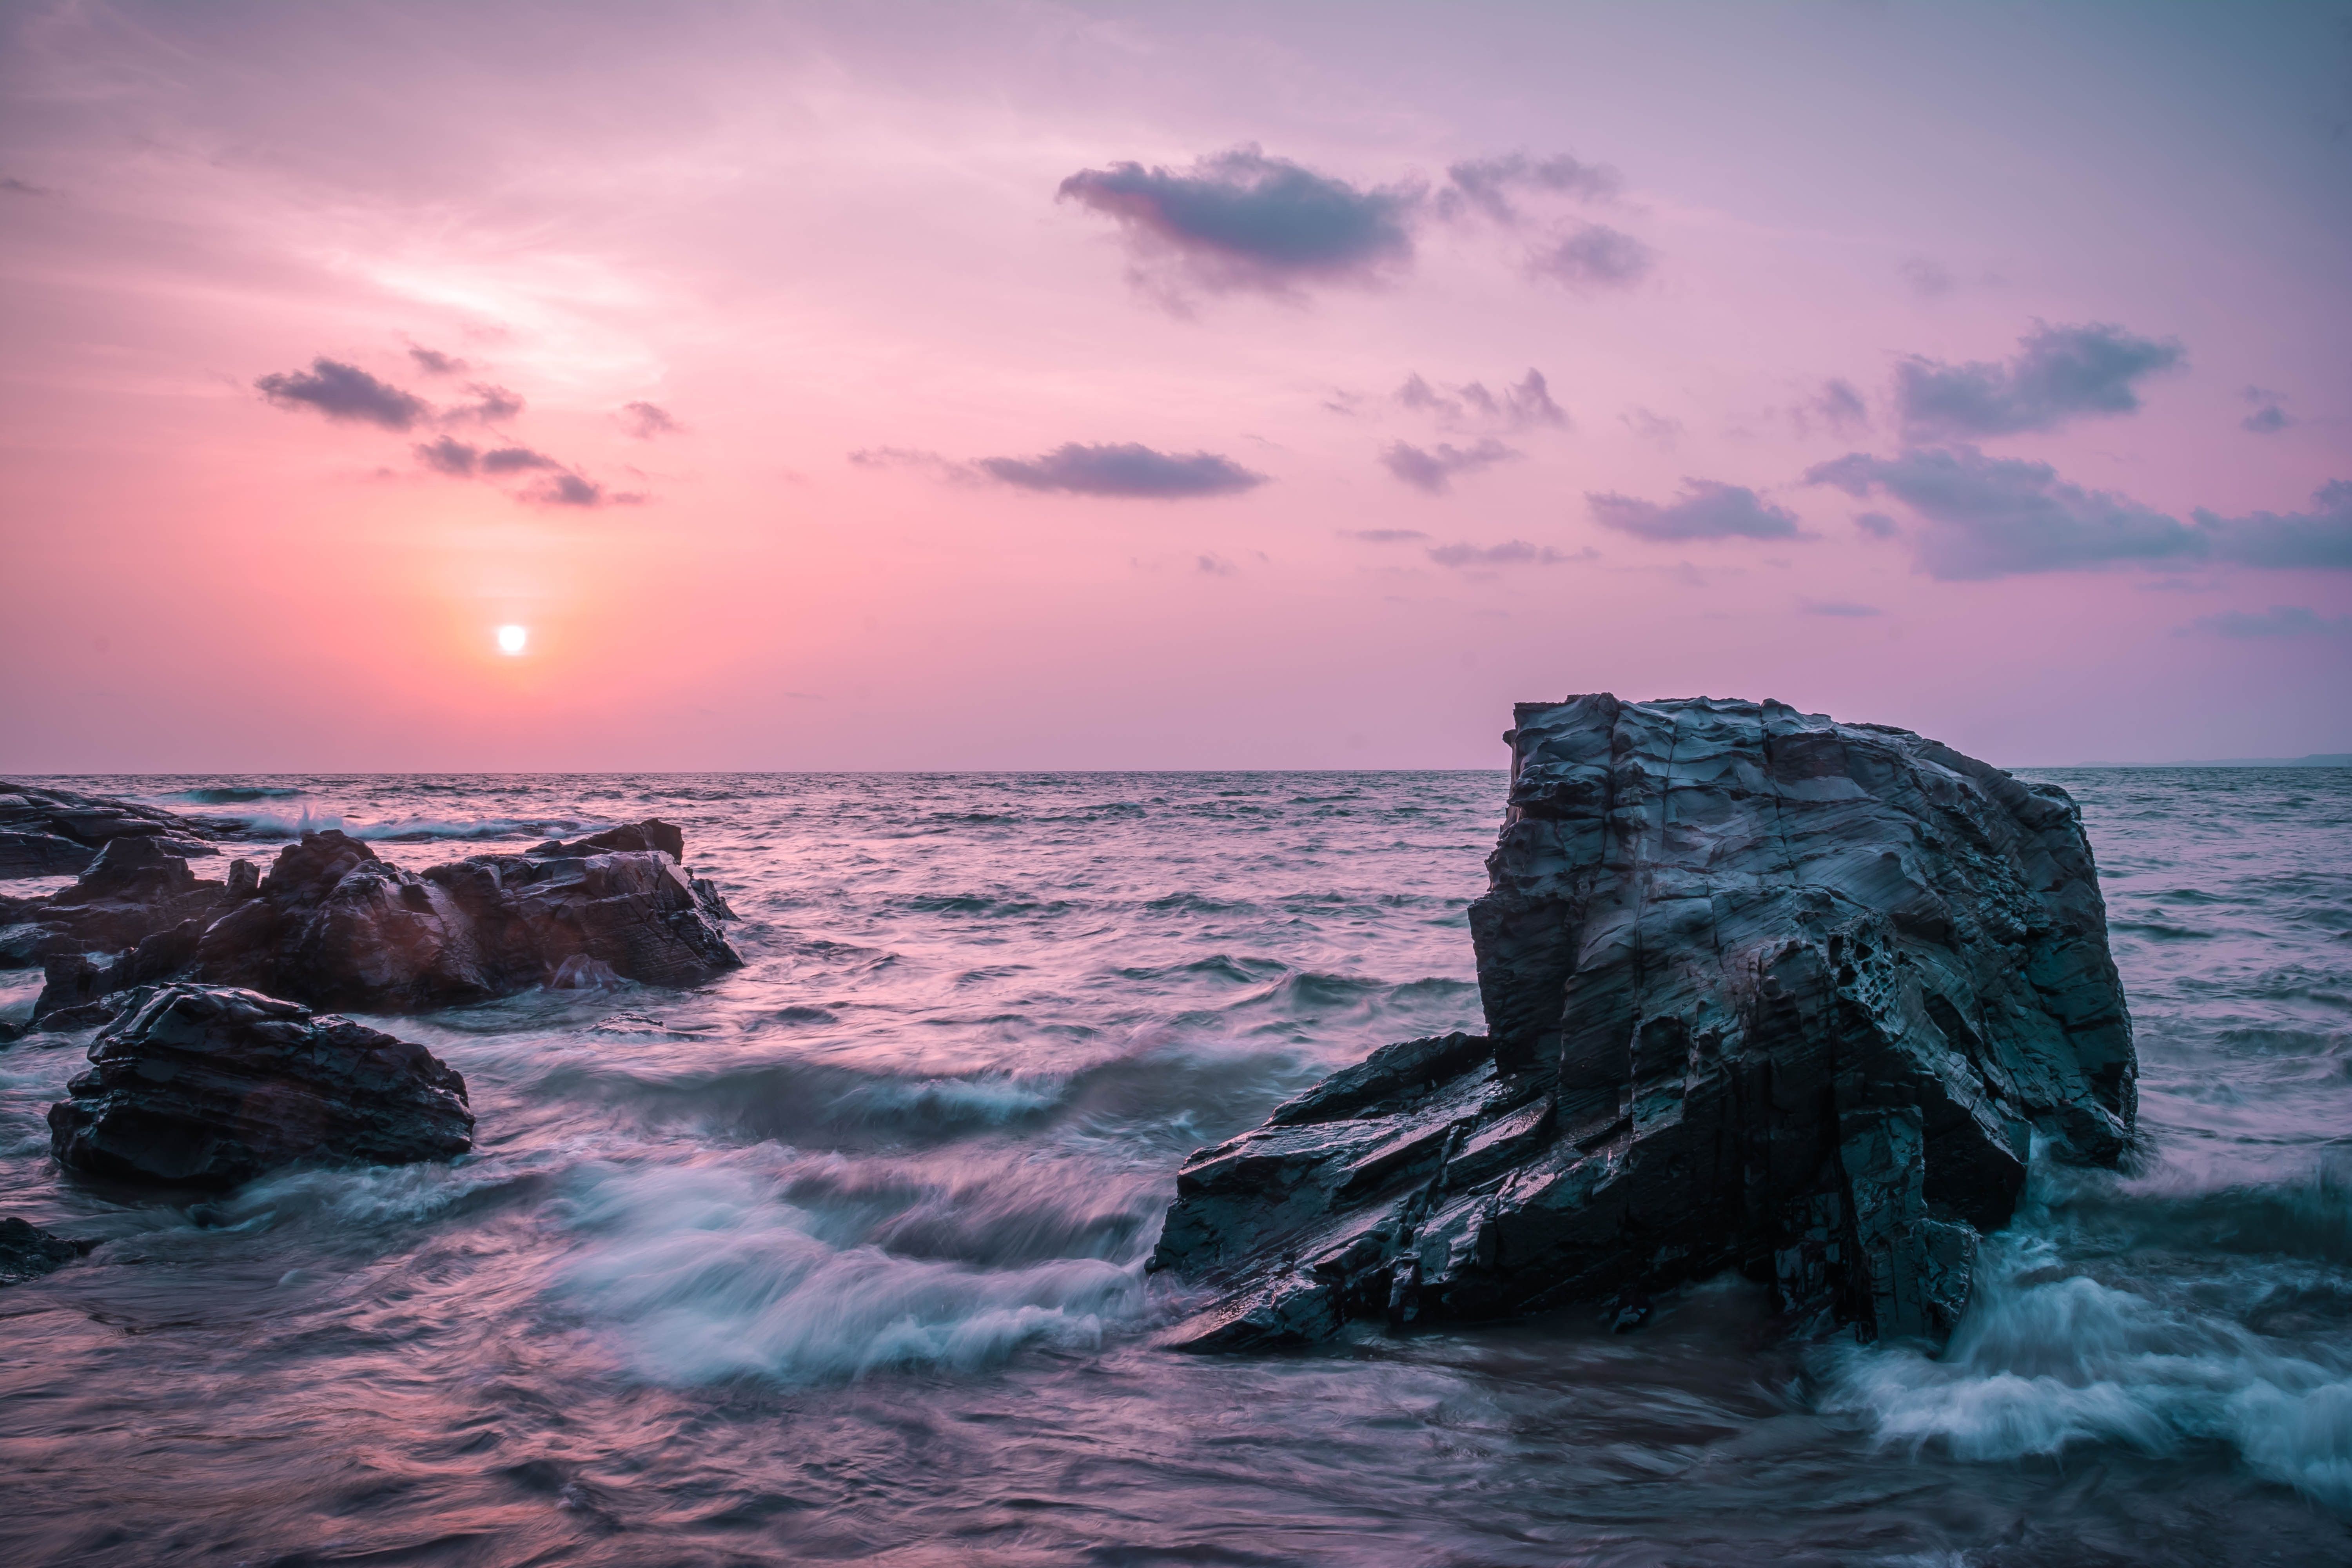 A photo of a beautiful sunset over the ocean with a rock in the foreground. - Landscape, sunrise